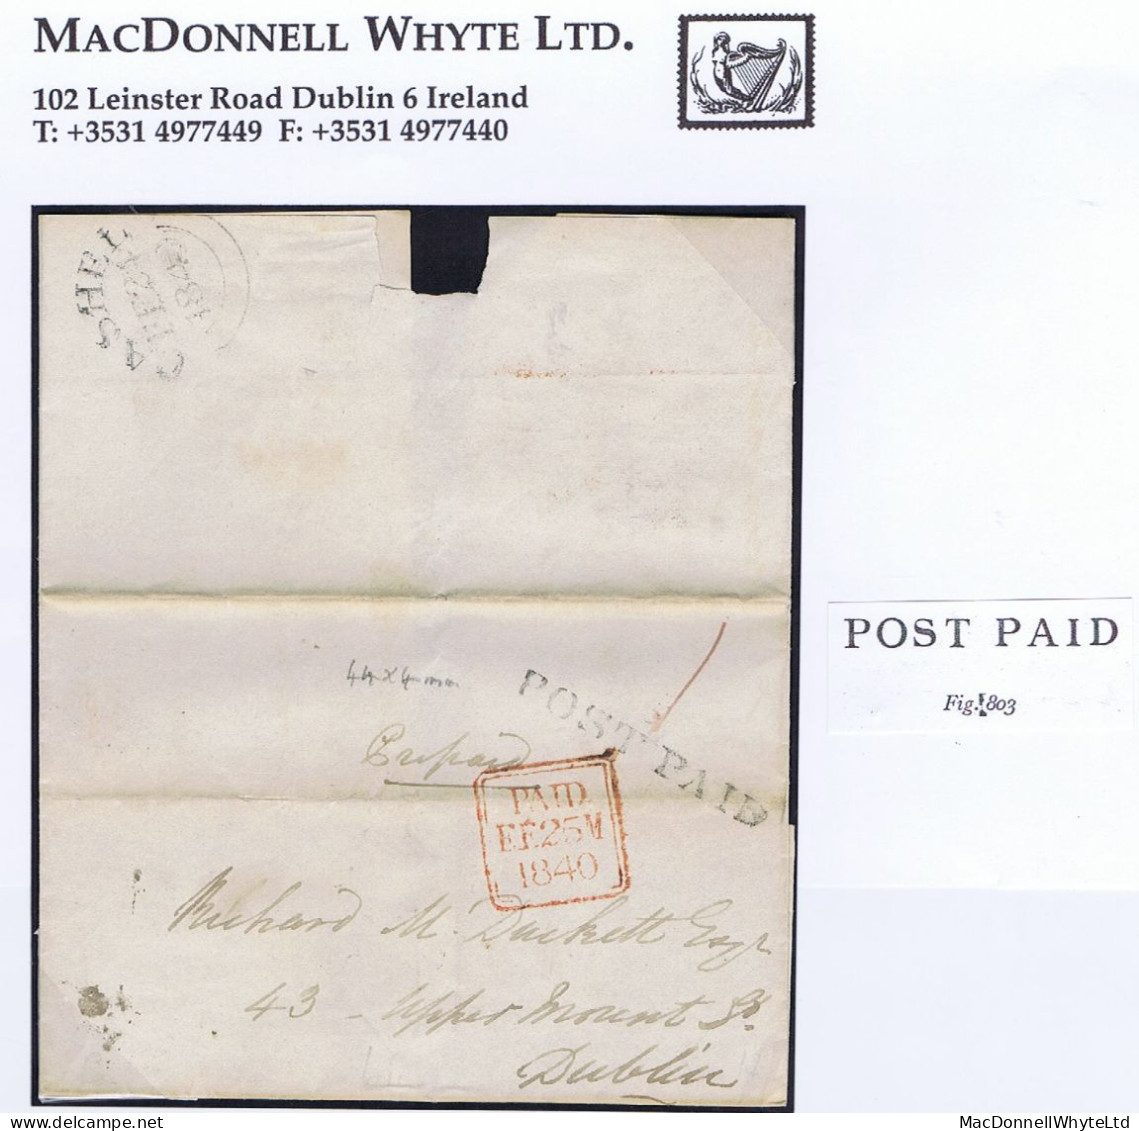 Ireland Tipperary Uniform Penny Post 1840 Cover To Dublin With Unframed POST PAID Of Cashel, CASHEL FE 24 1840 Cds - Prephilately